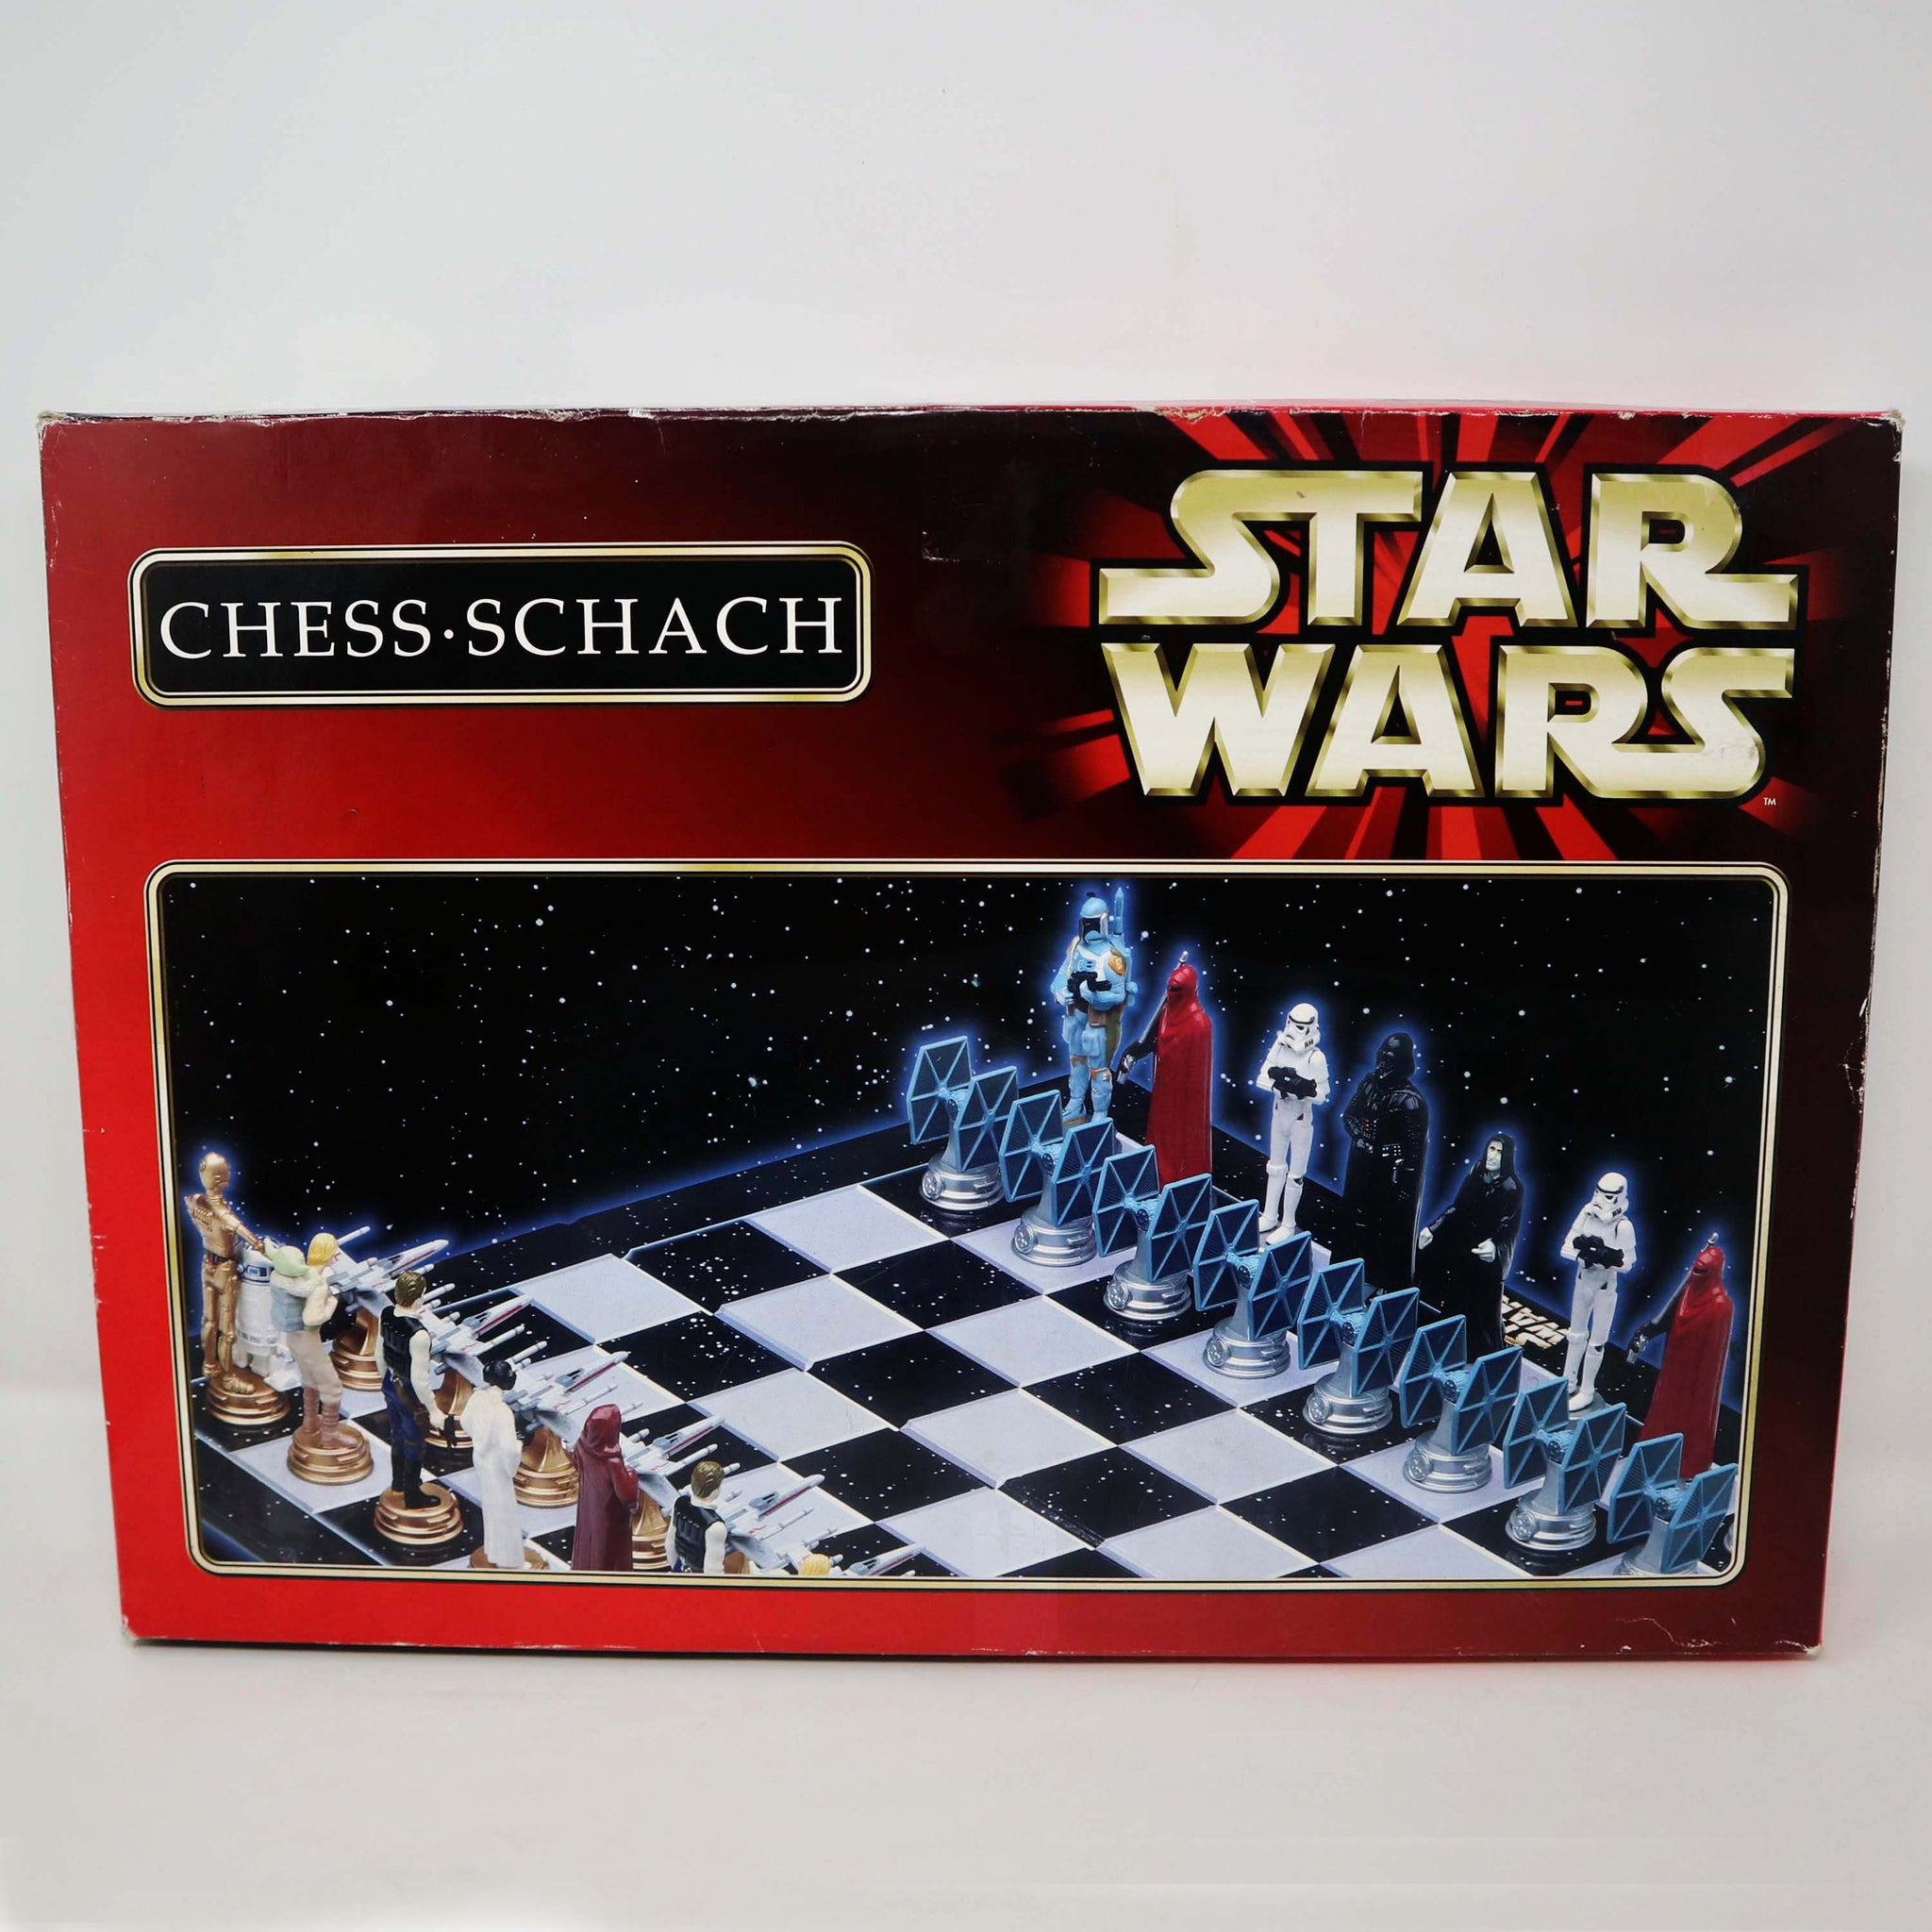 Vintage 1999 A La Carte Star Wars Chess-Schach Collector's 3D Chess Set Game Boxed Rare